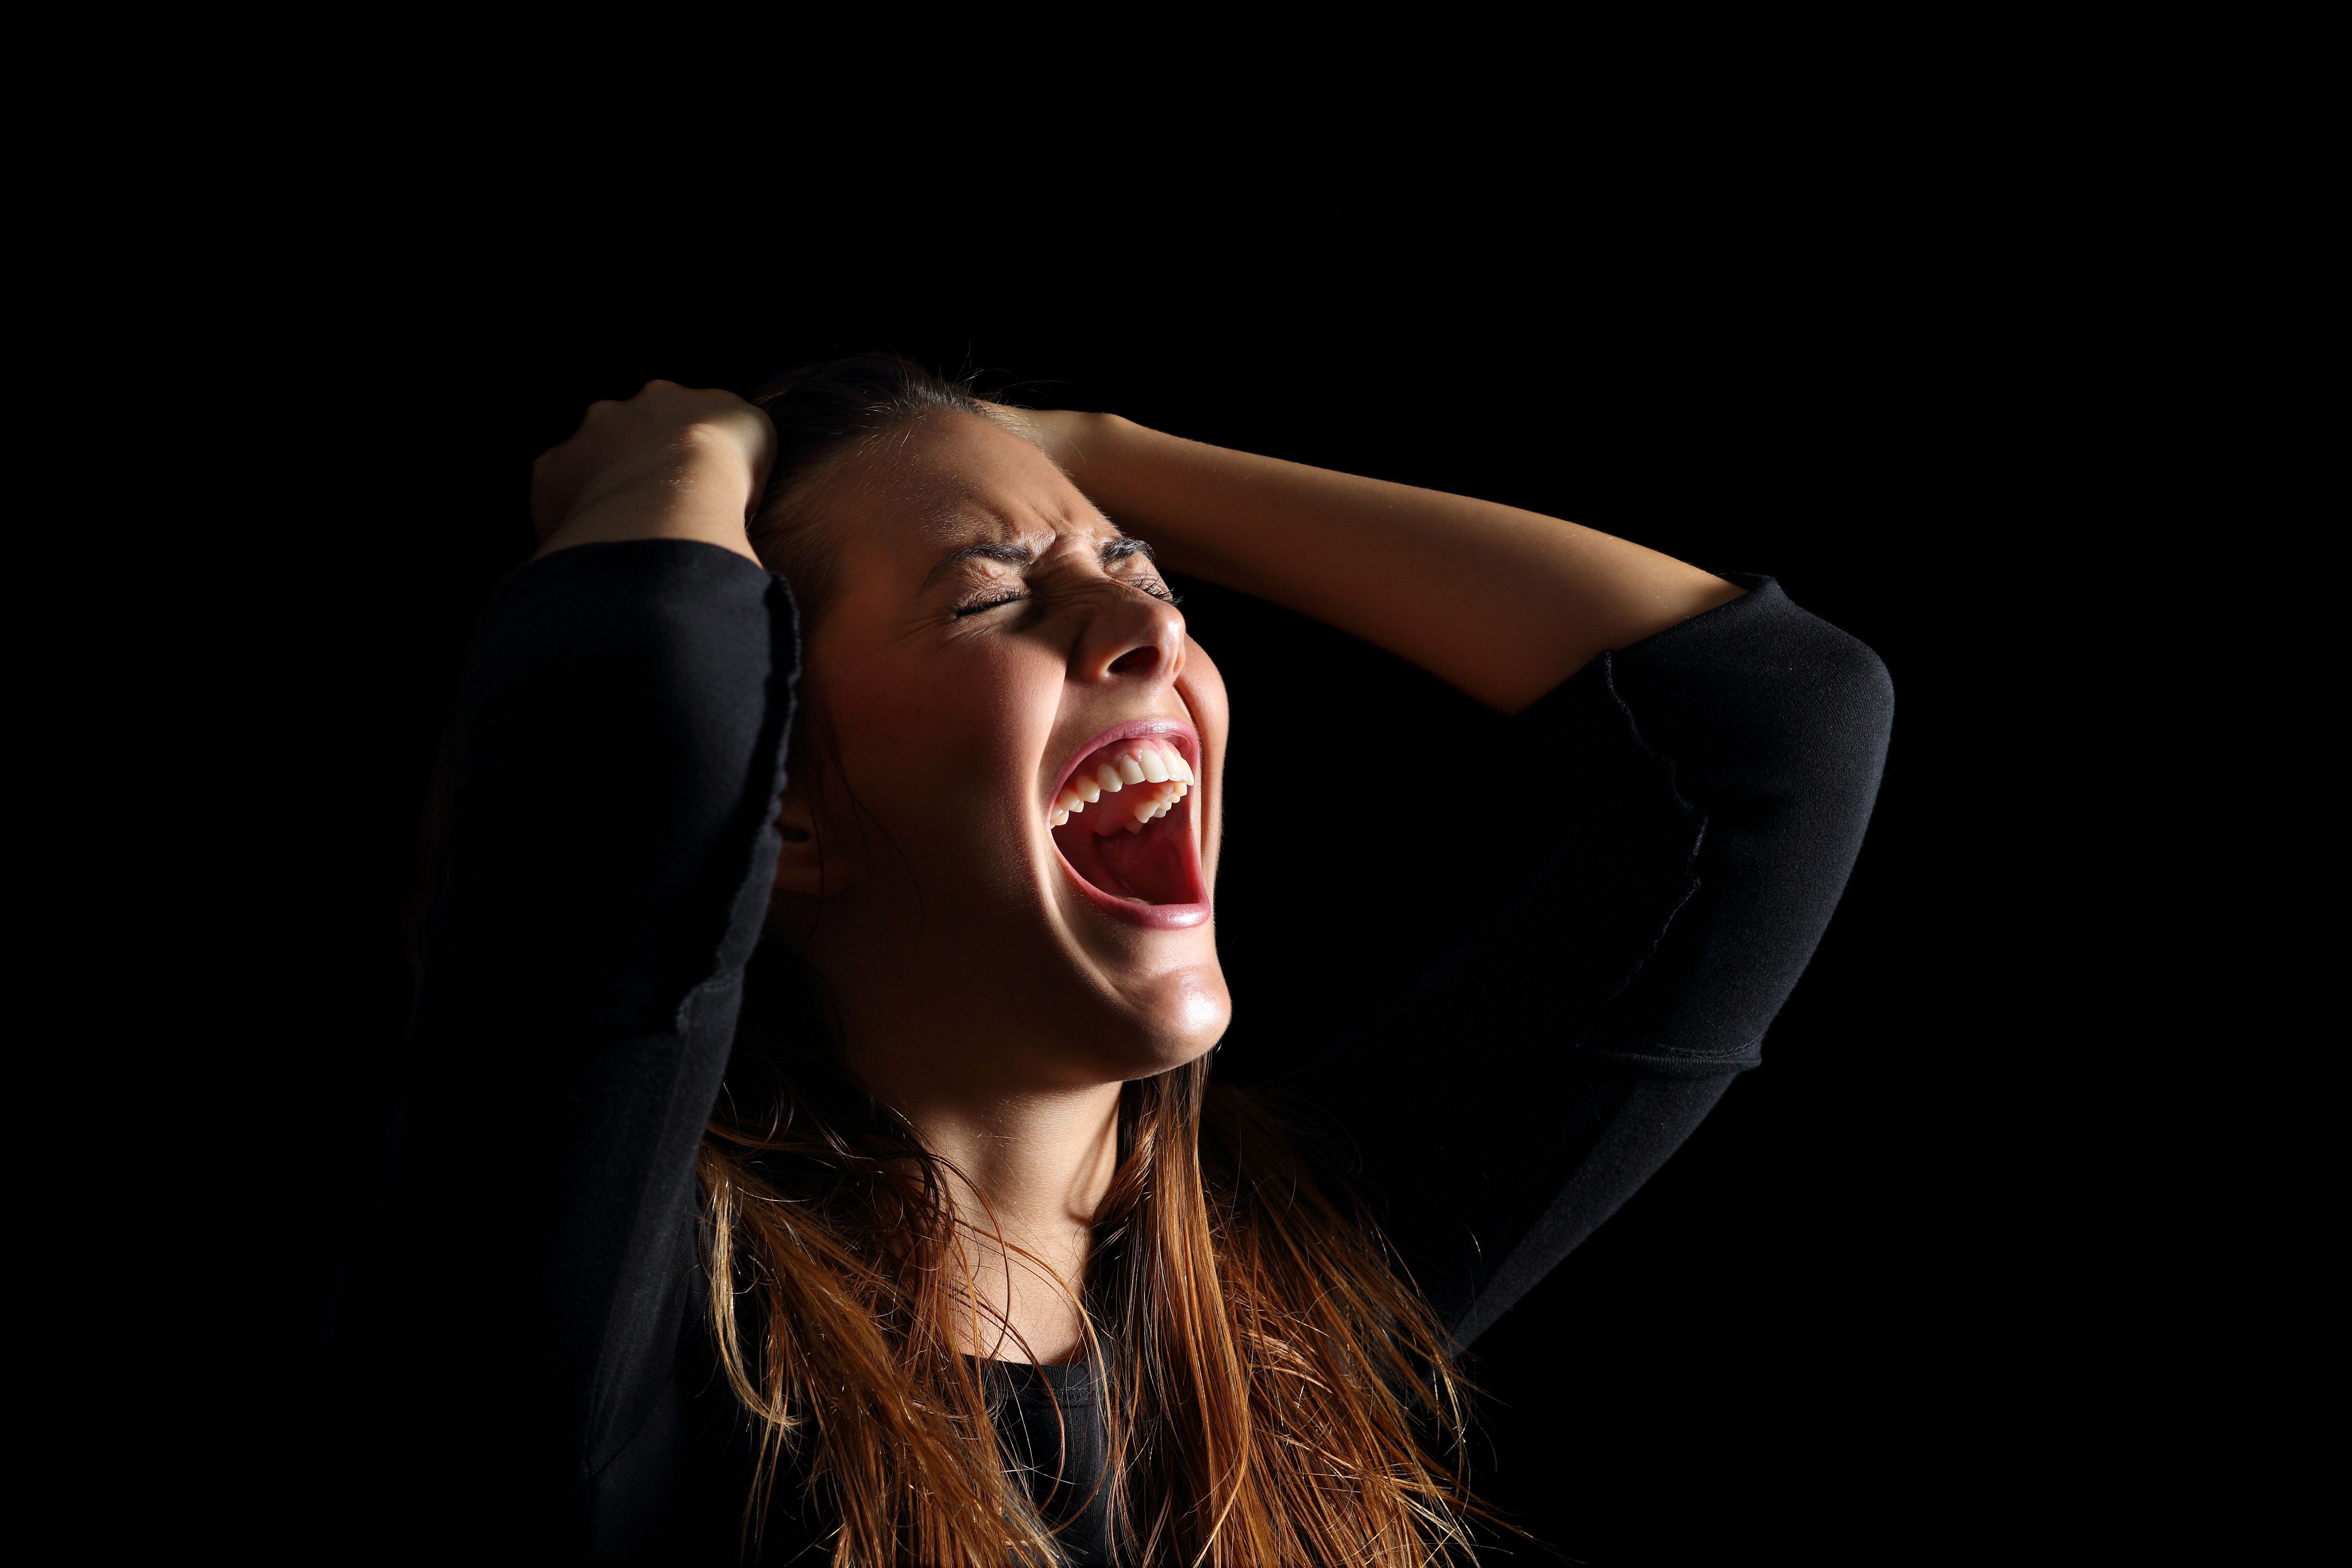 A woman with her eyes closed and screaming while holding her hair | Source: Getty Images